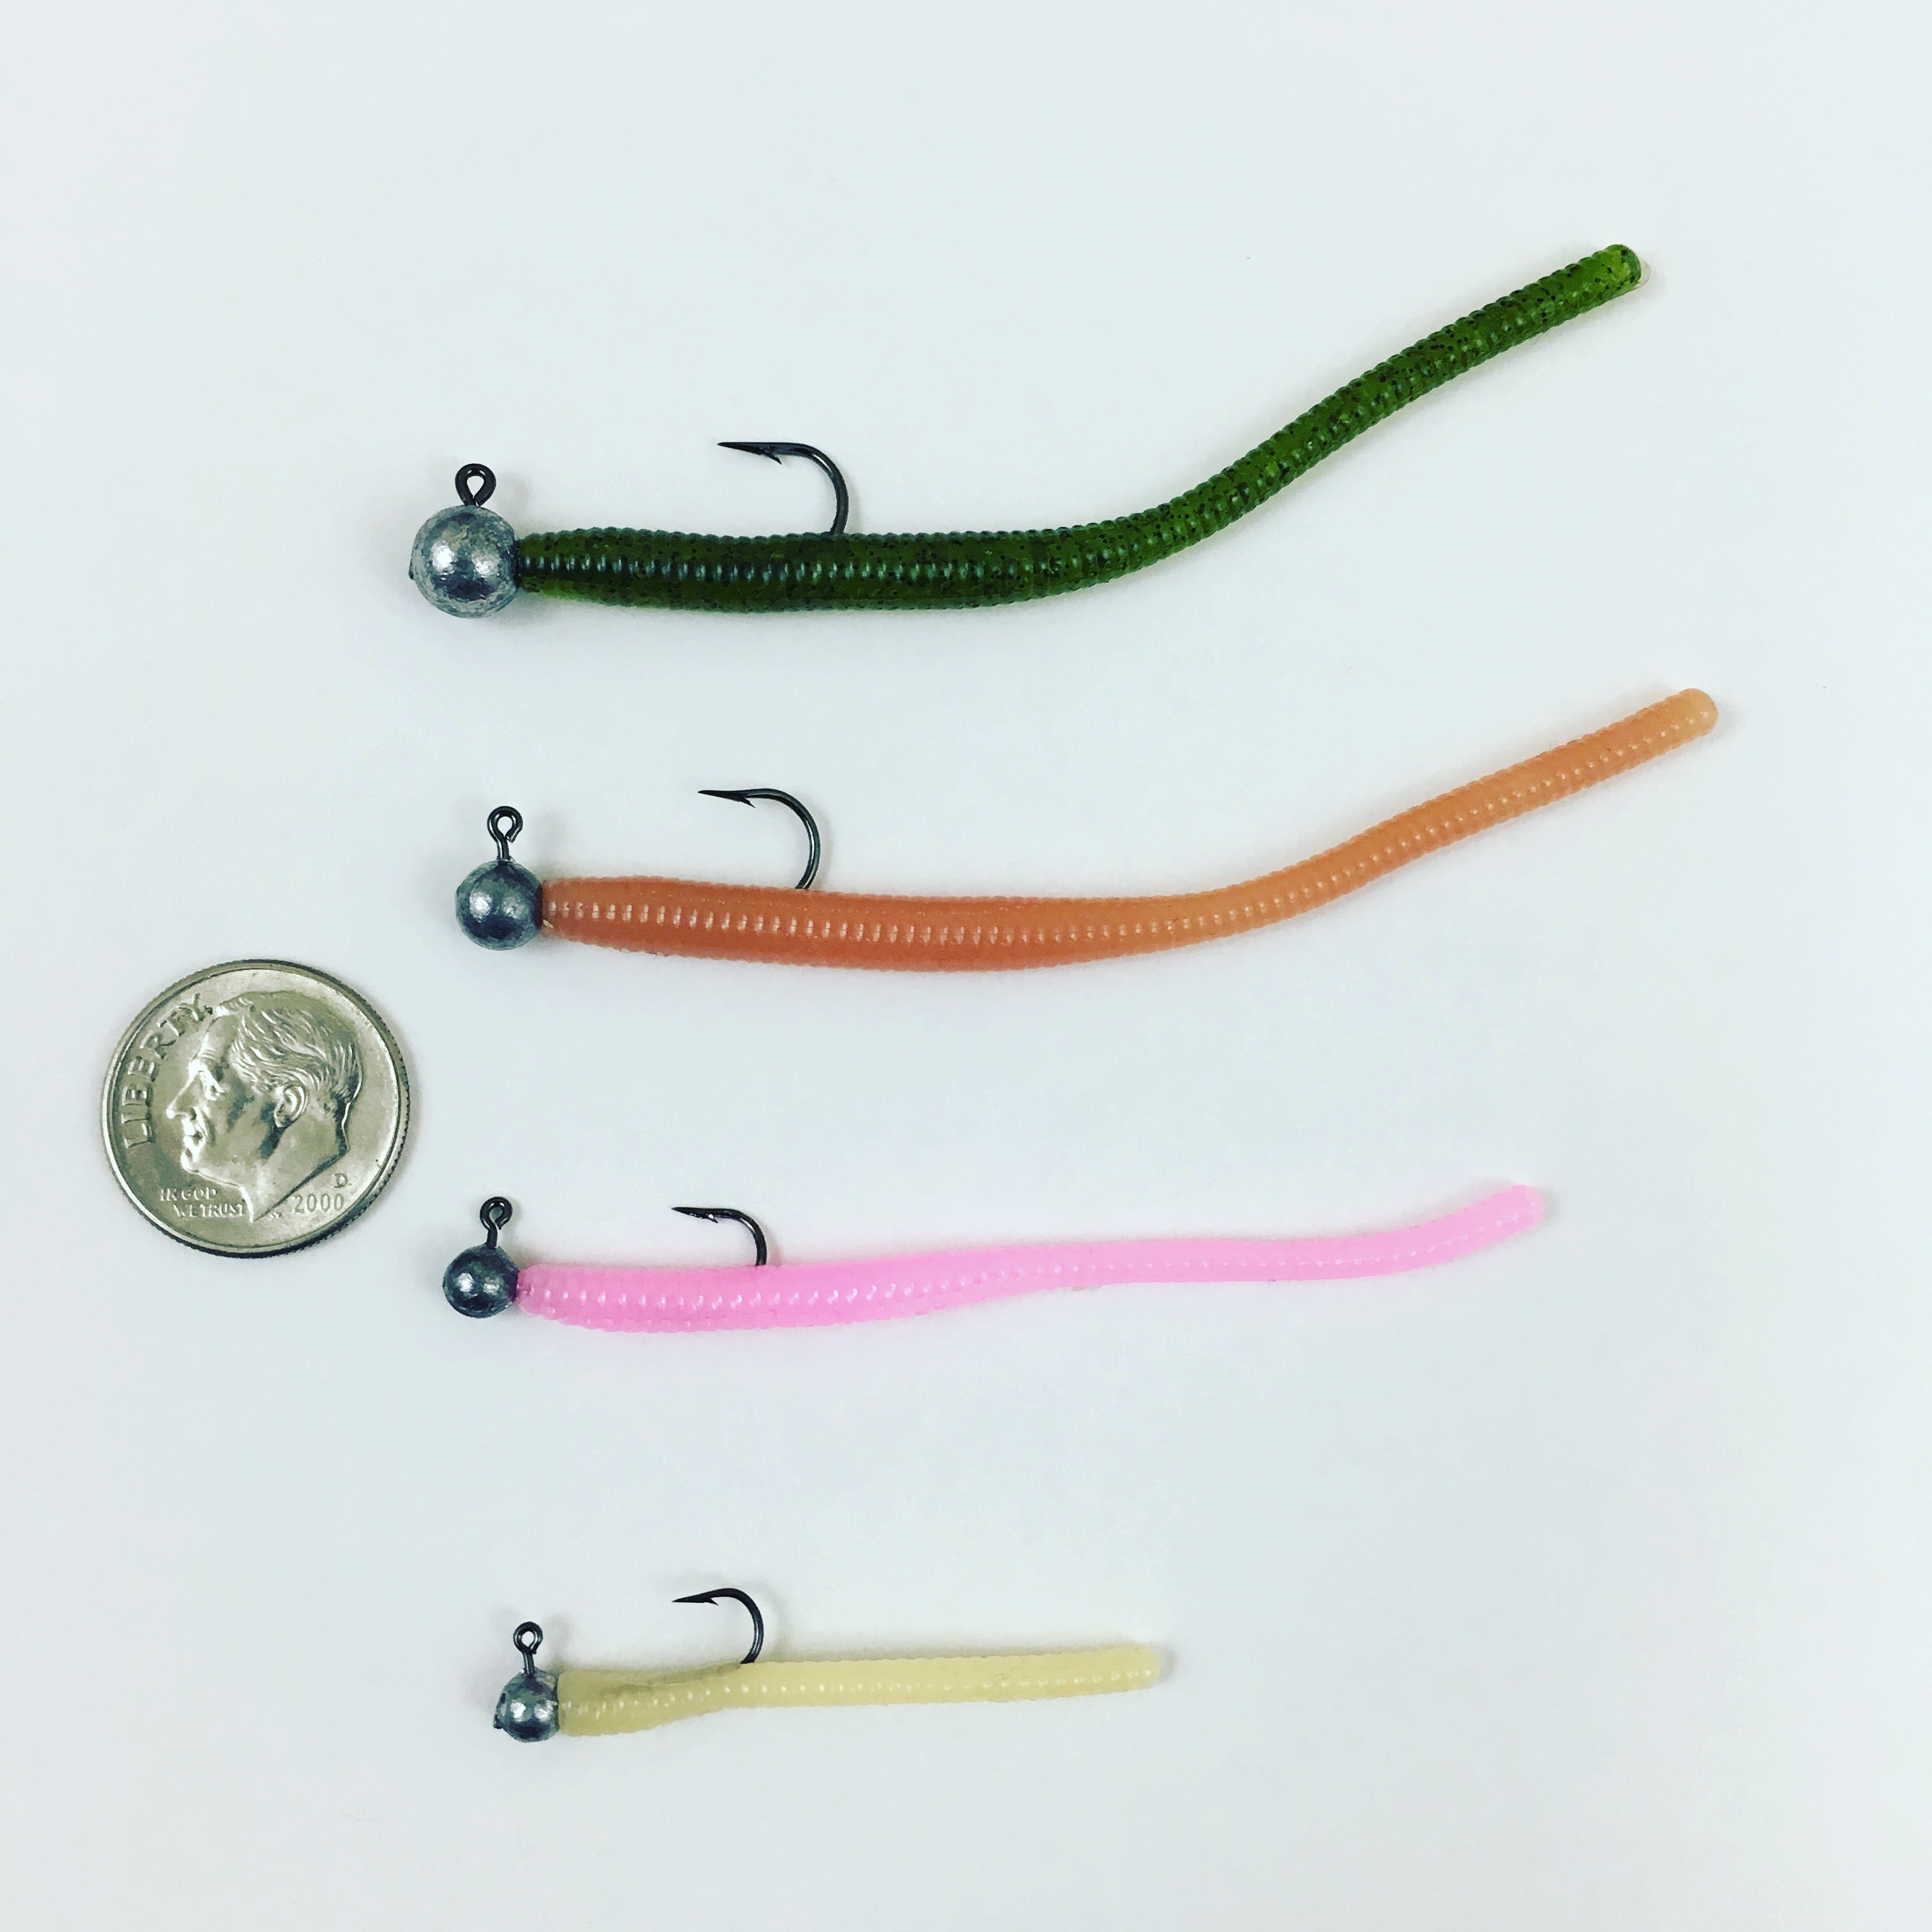 Trout Worm with Egg: Hot Pink/White